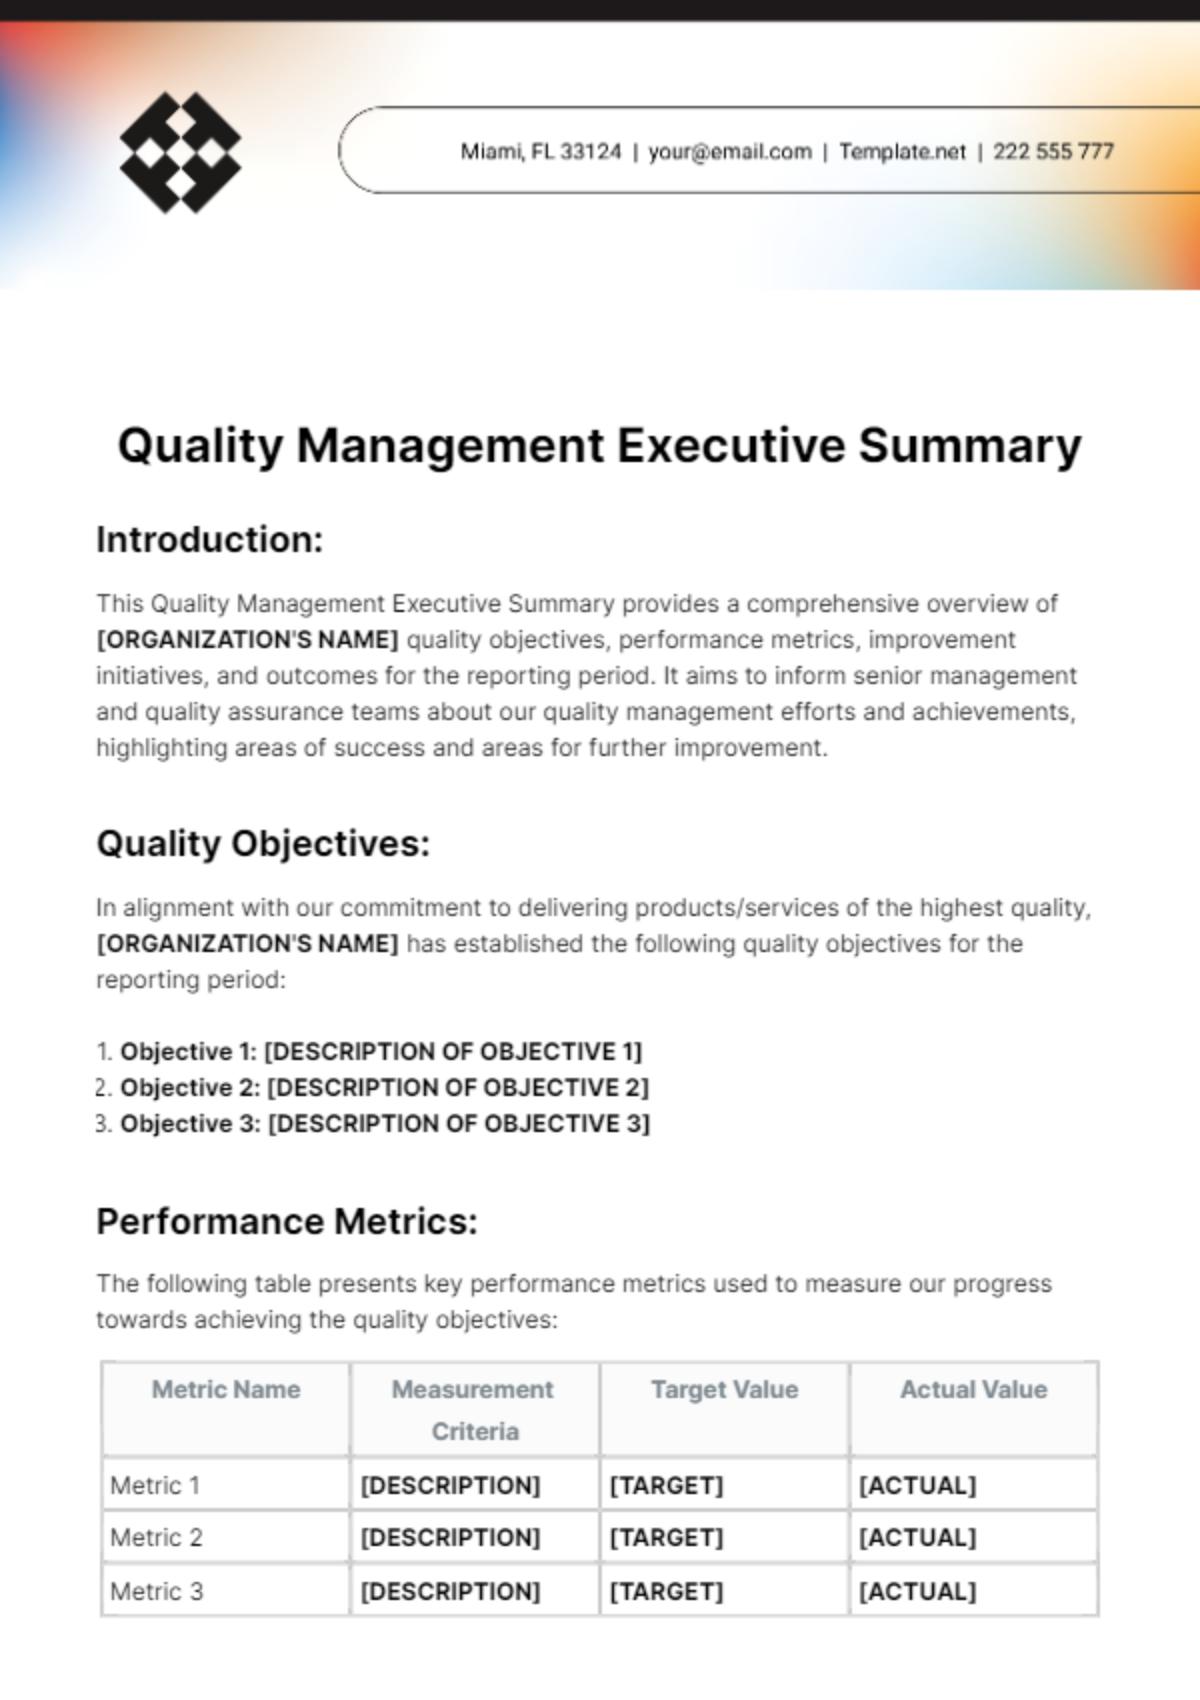 Quality Management Executive Summary Template